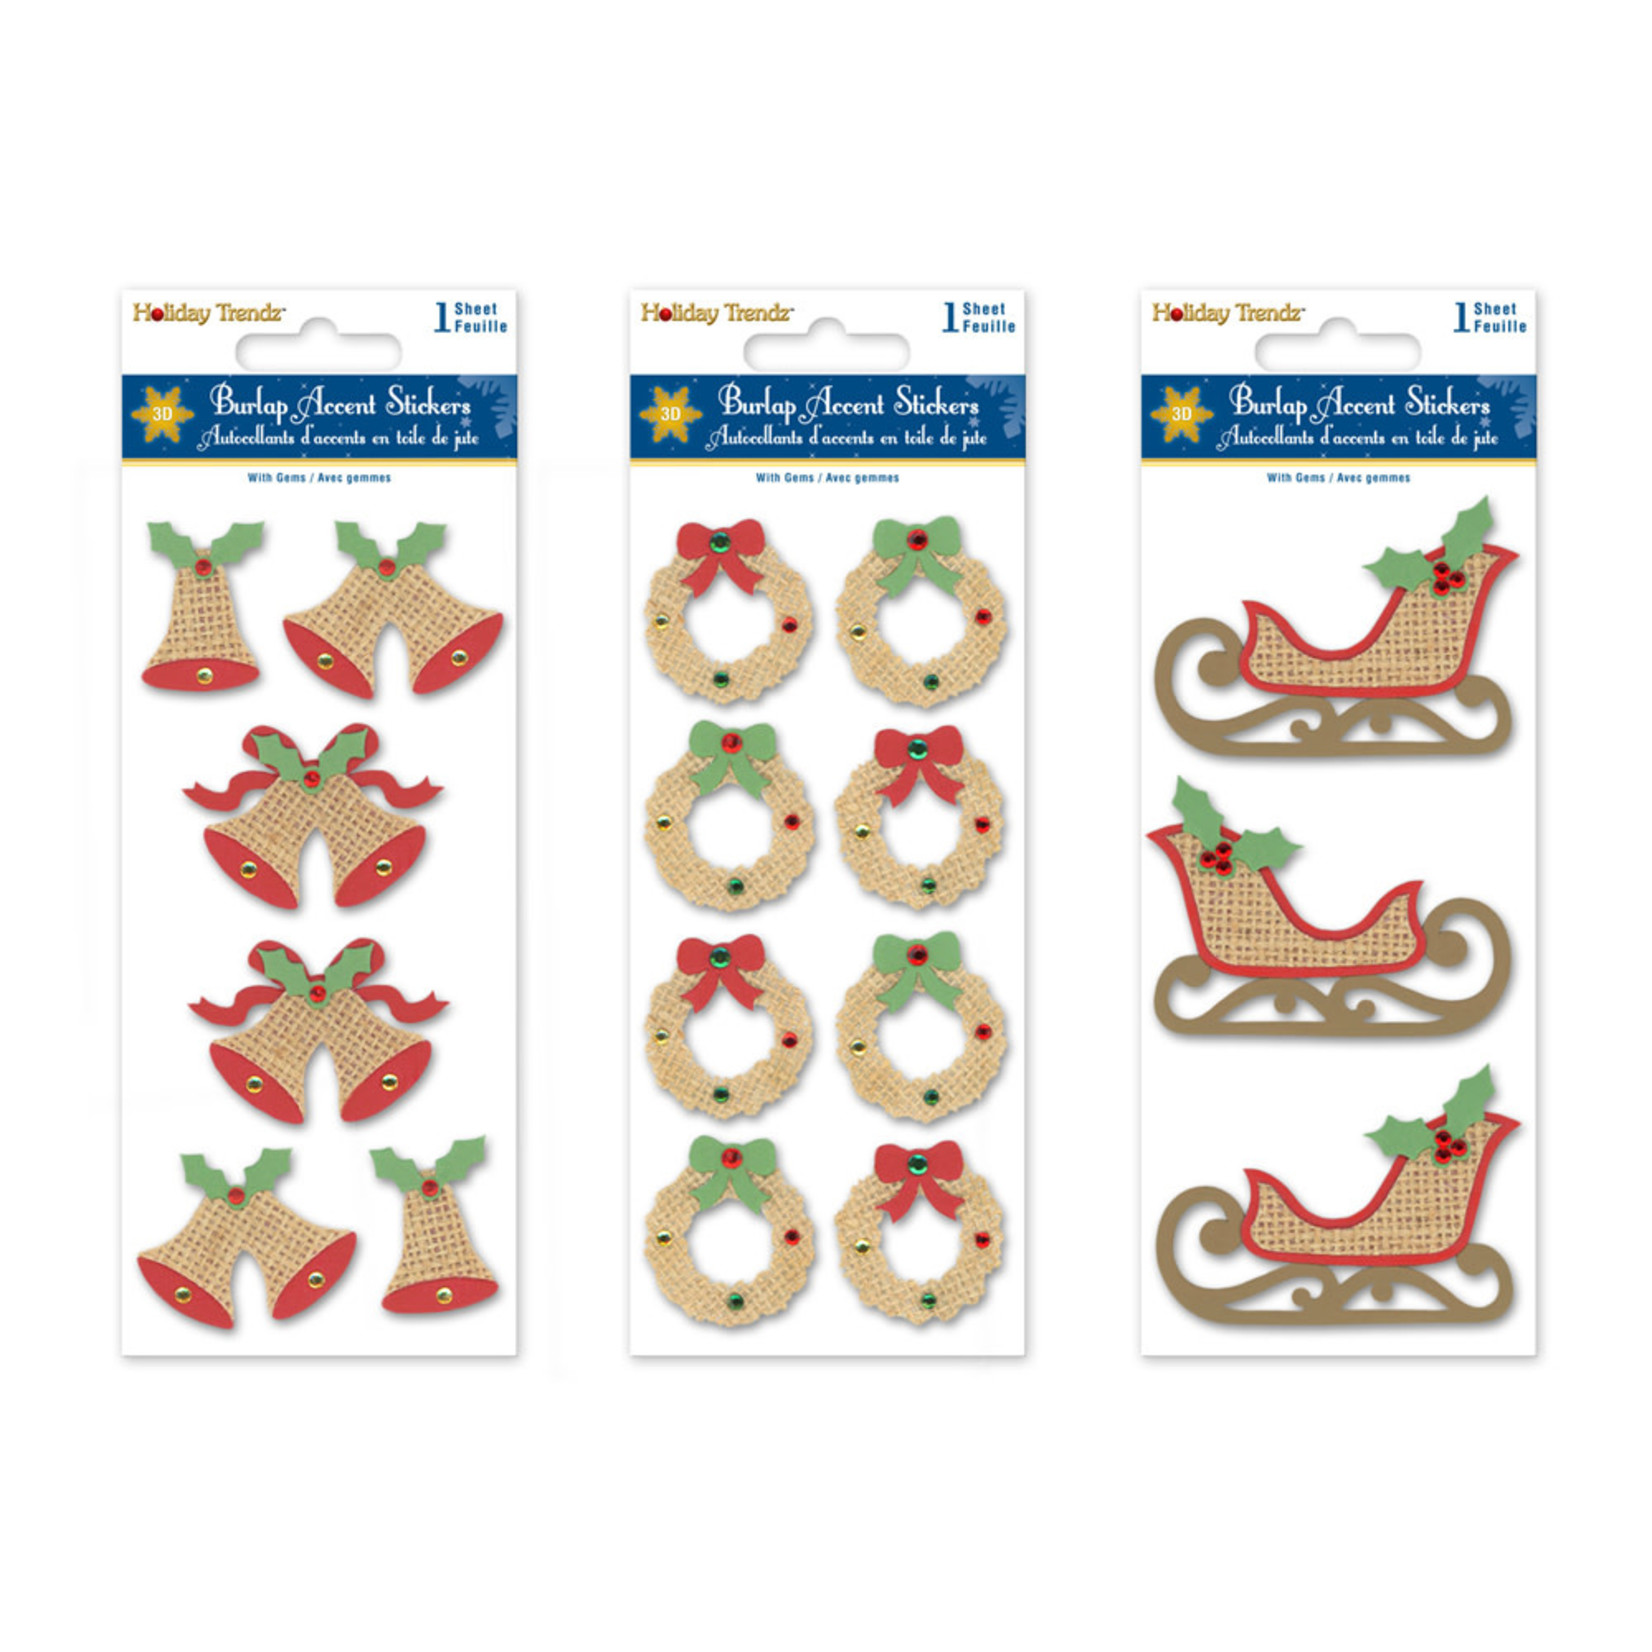 HOLIDAY STICKERS: 3INX6.4IN 3D BURLAP ACCENTS ASST 12EAX3STYLES A) SEASONAL ICONS